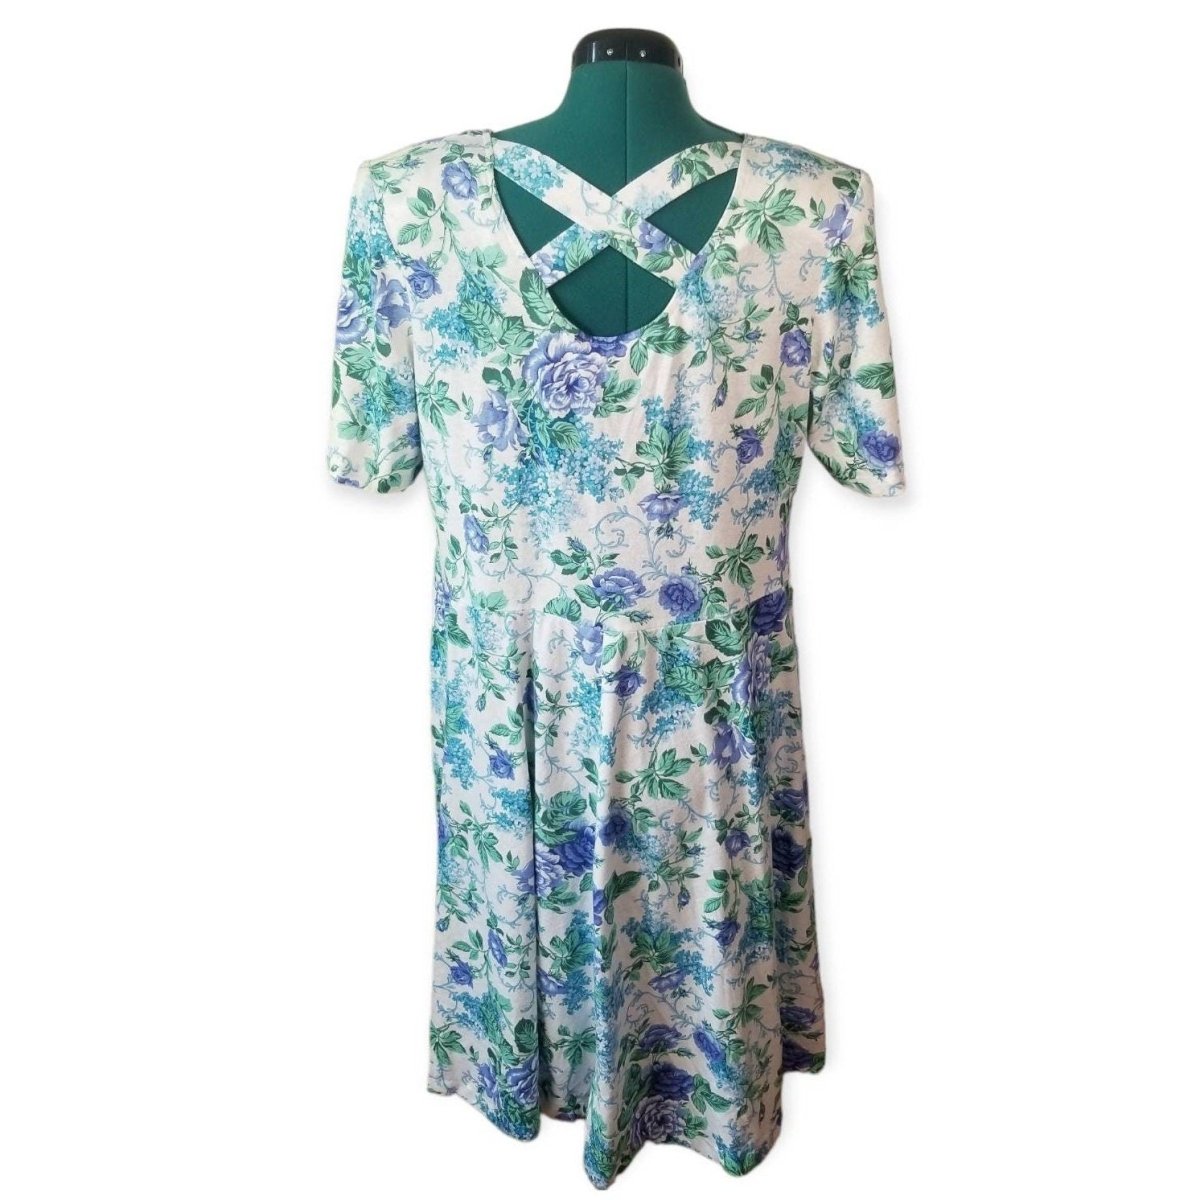 80s/90s Floral Midi Dress with Criss Cross Back 1X/2X - themallvintage The Mall Vintage